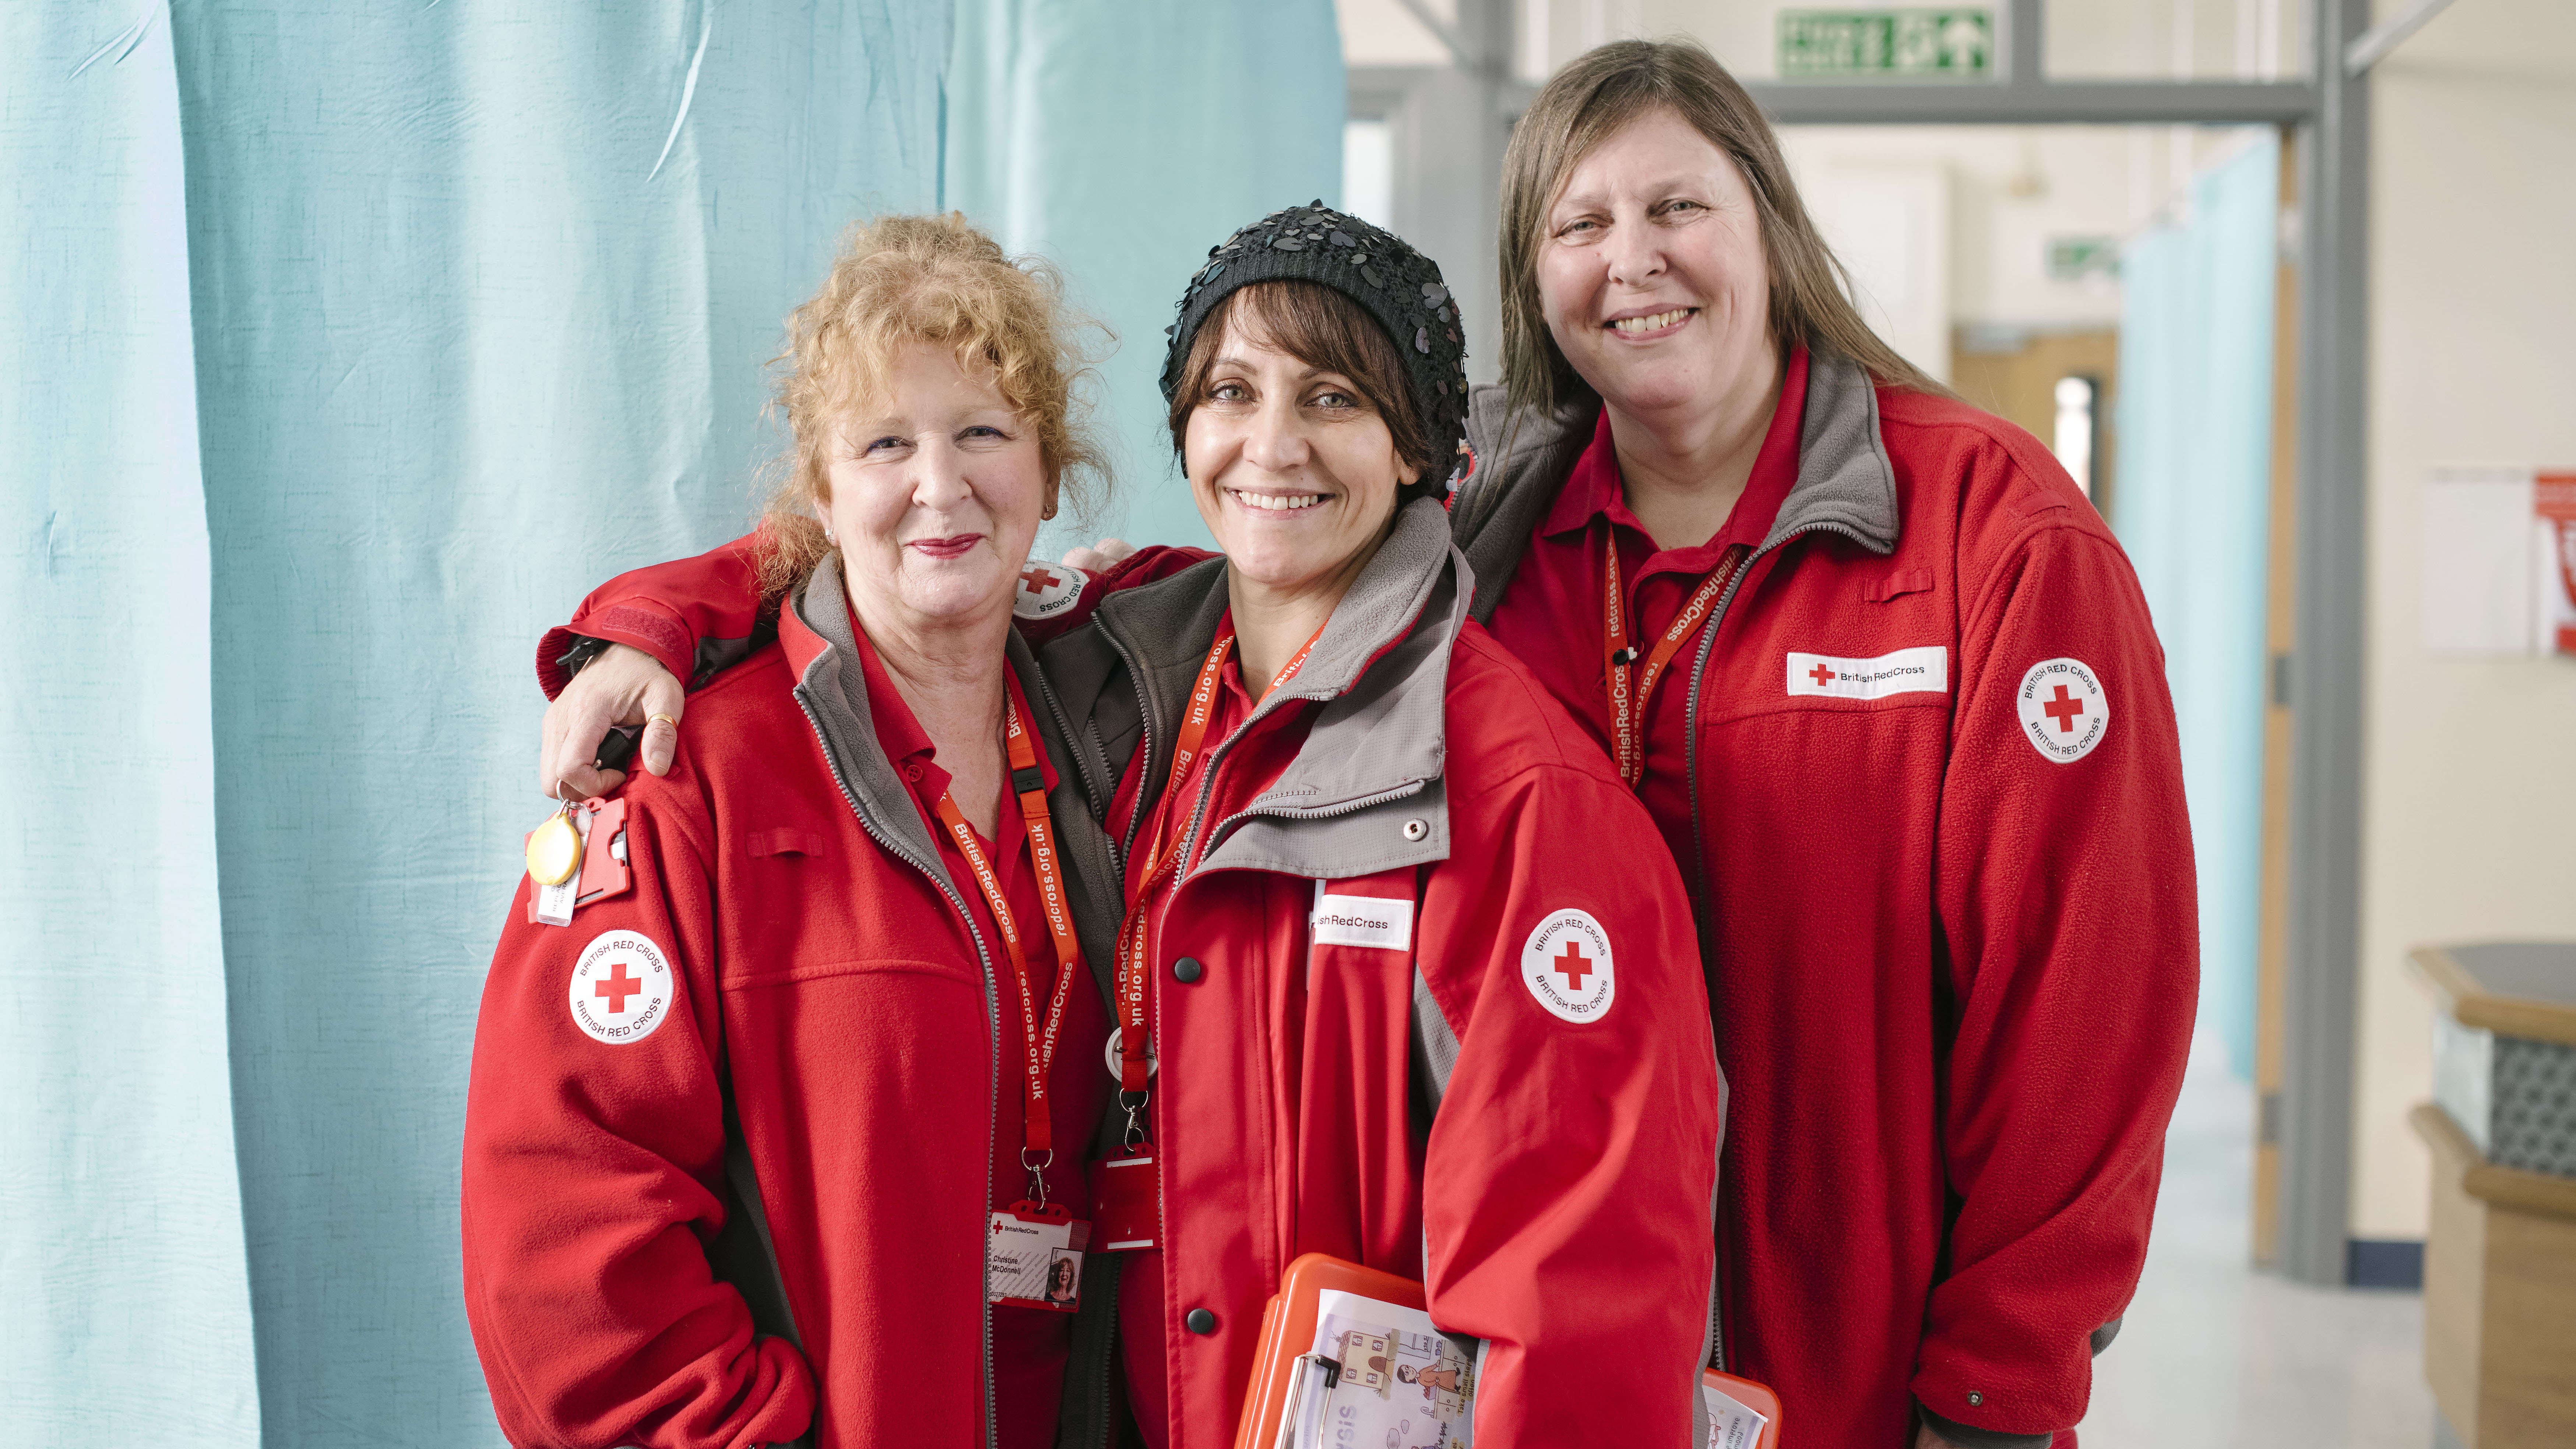 British Red Cross staff members at a hospital in Stockport